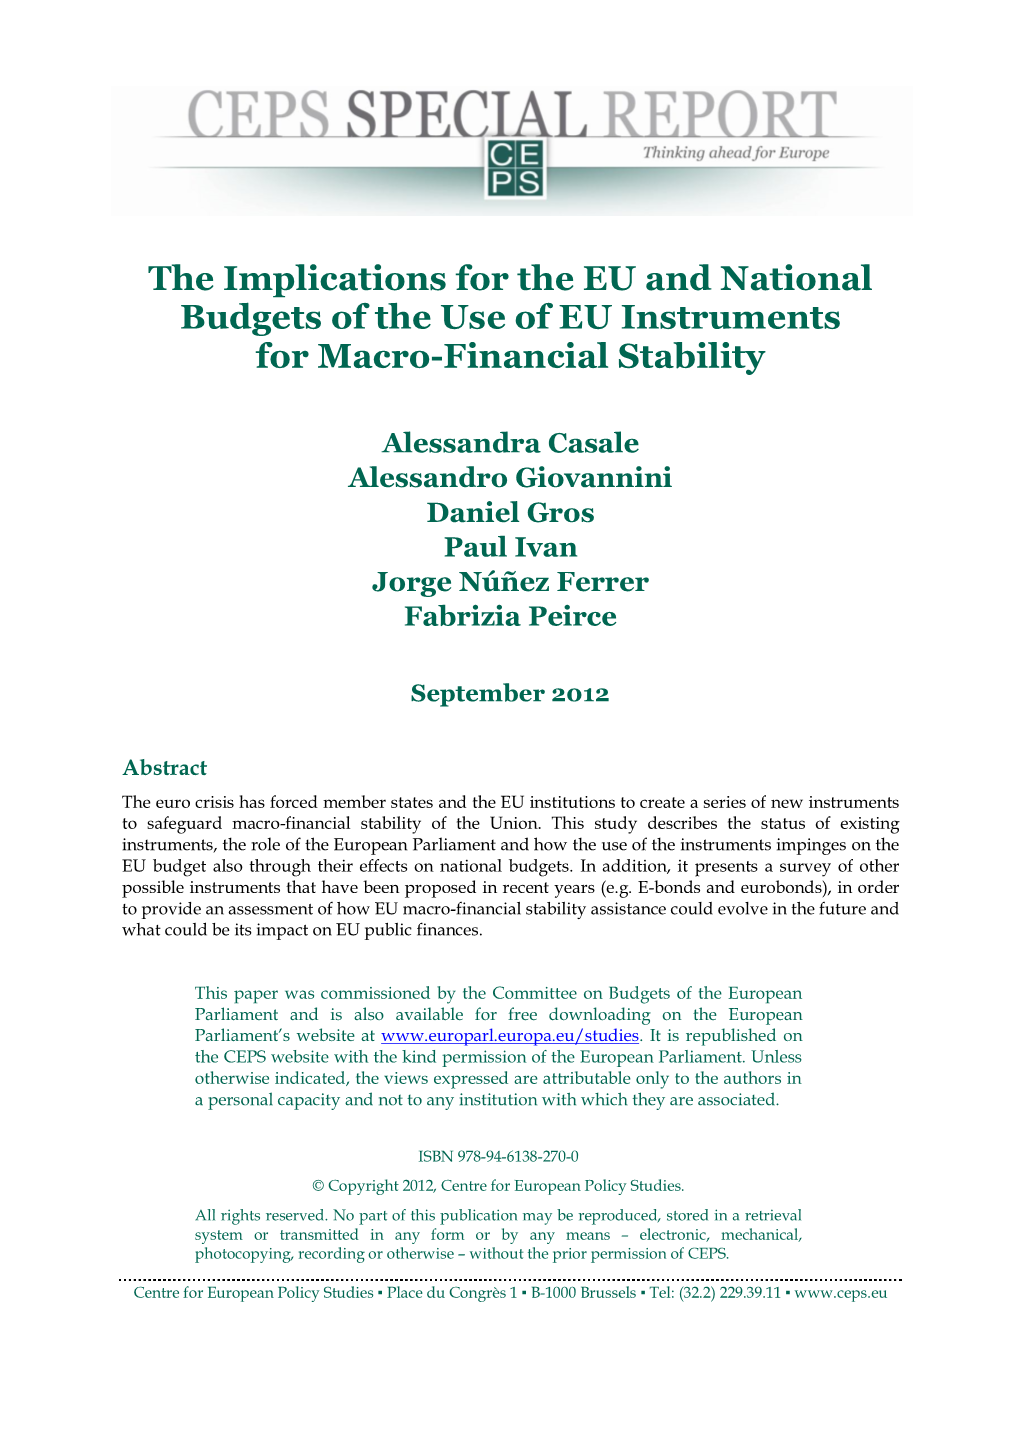 The Implications for the EU and National Budgets of the Use of EU Instruments for Macro-Financial Stability